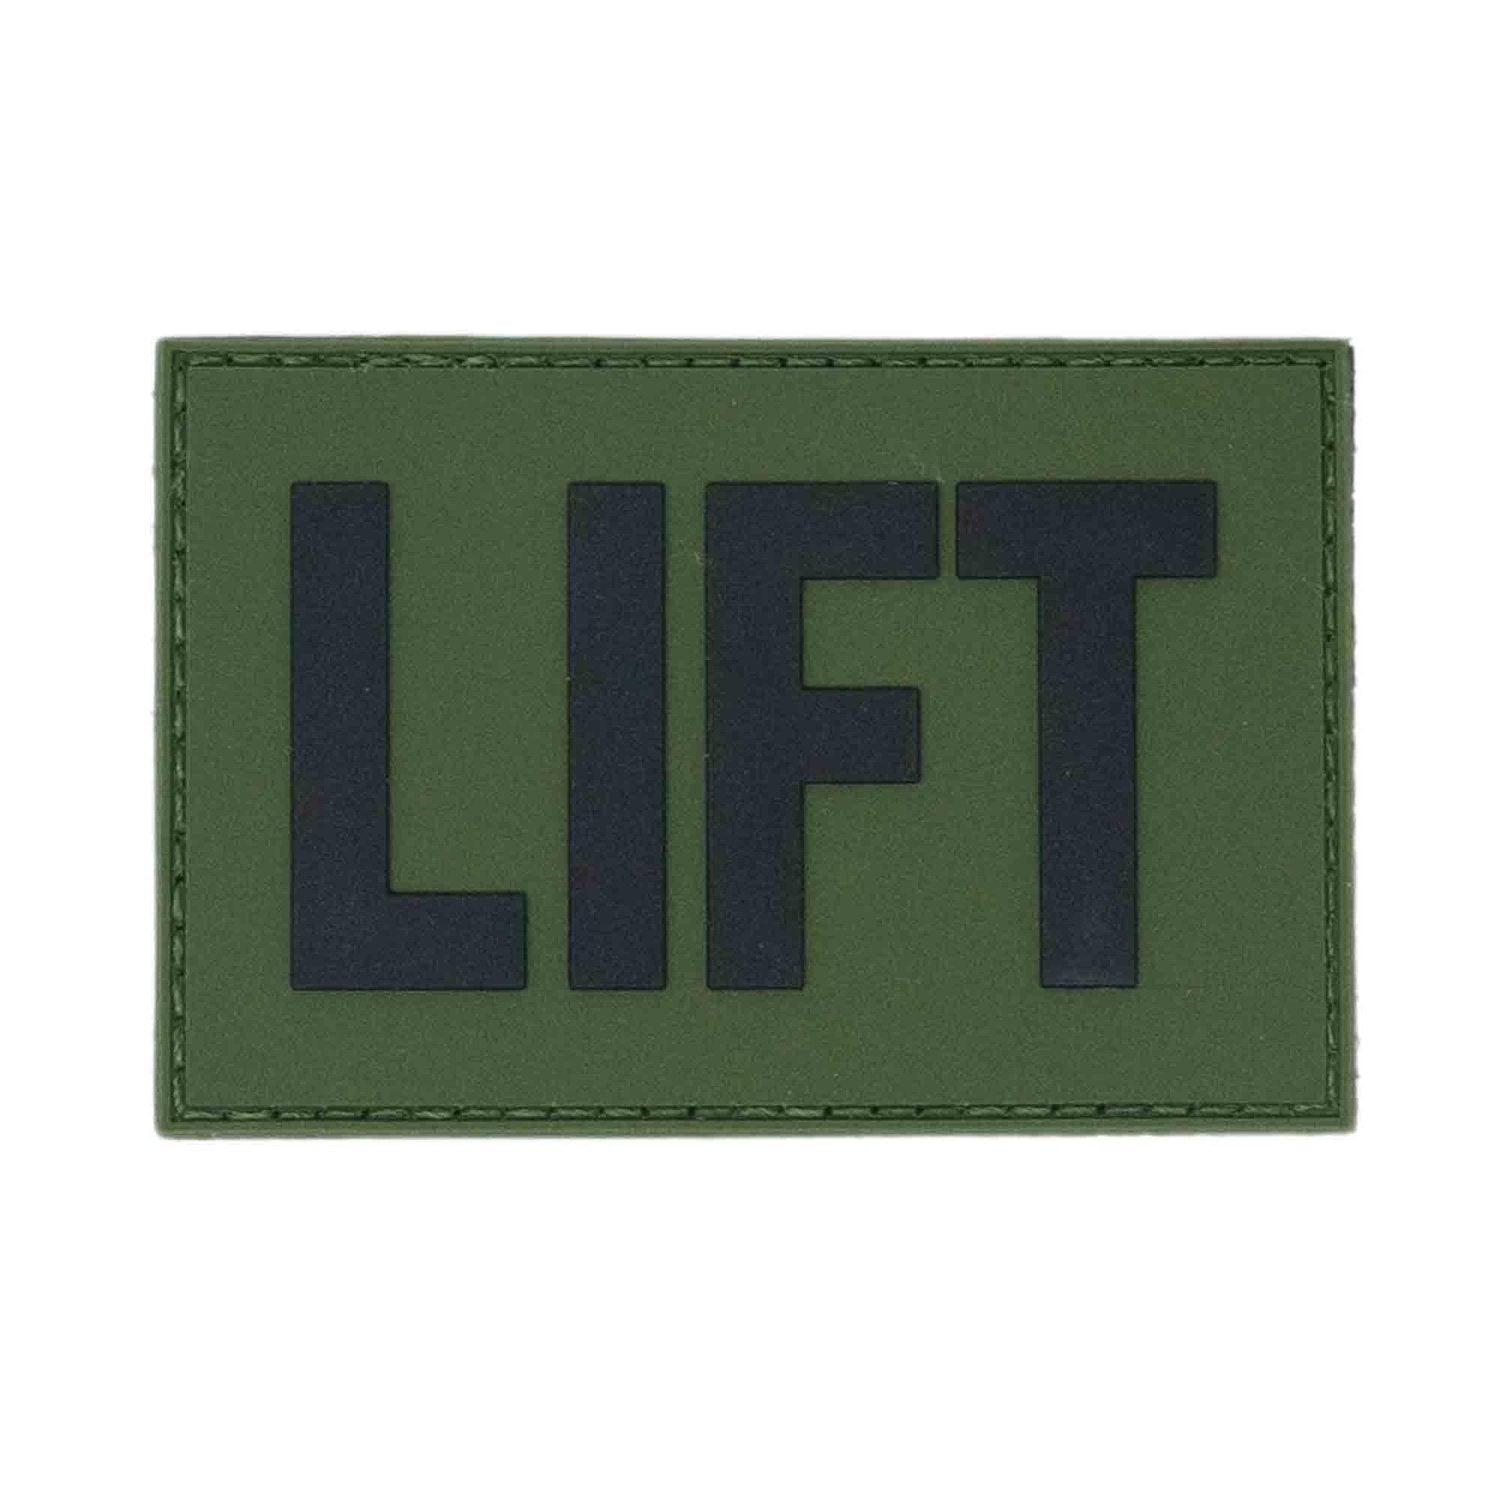 2POOD Barbell Patch  Velcro patches, Backpack patches, Patches